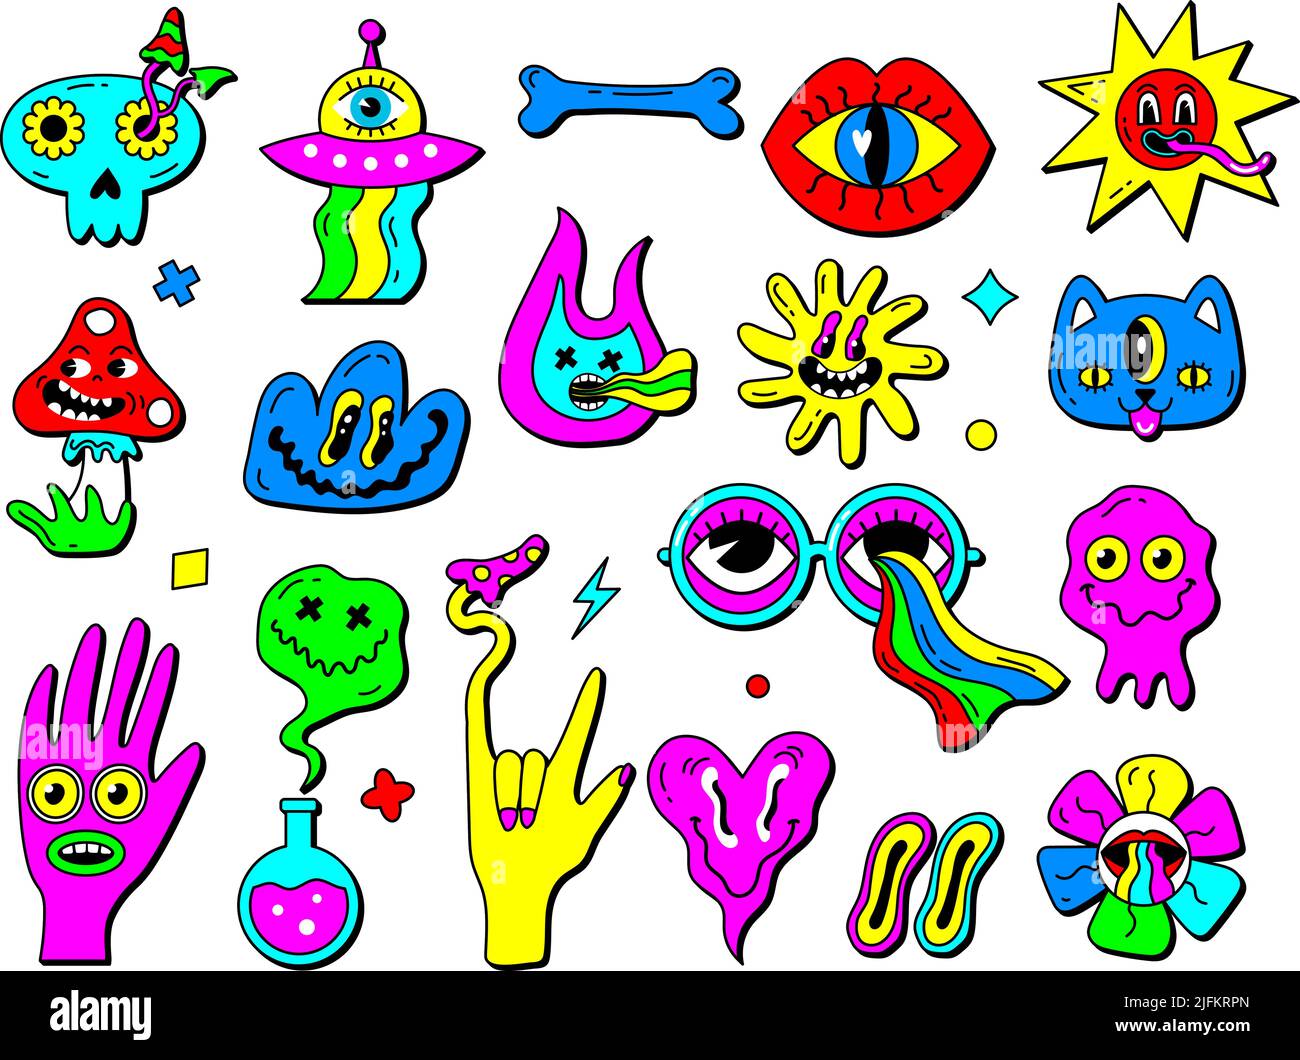 Psychedelic symbols. Hippy stickers collection funny emoticons faces hands mushrooms neon colored hallucination labels recent vector illustrations Stock Vector